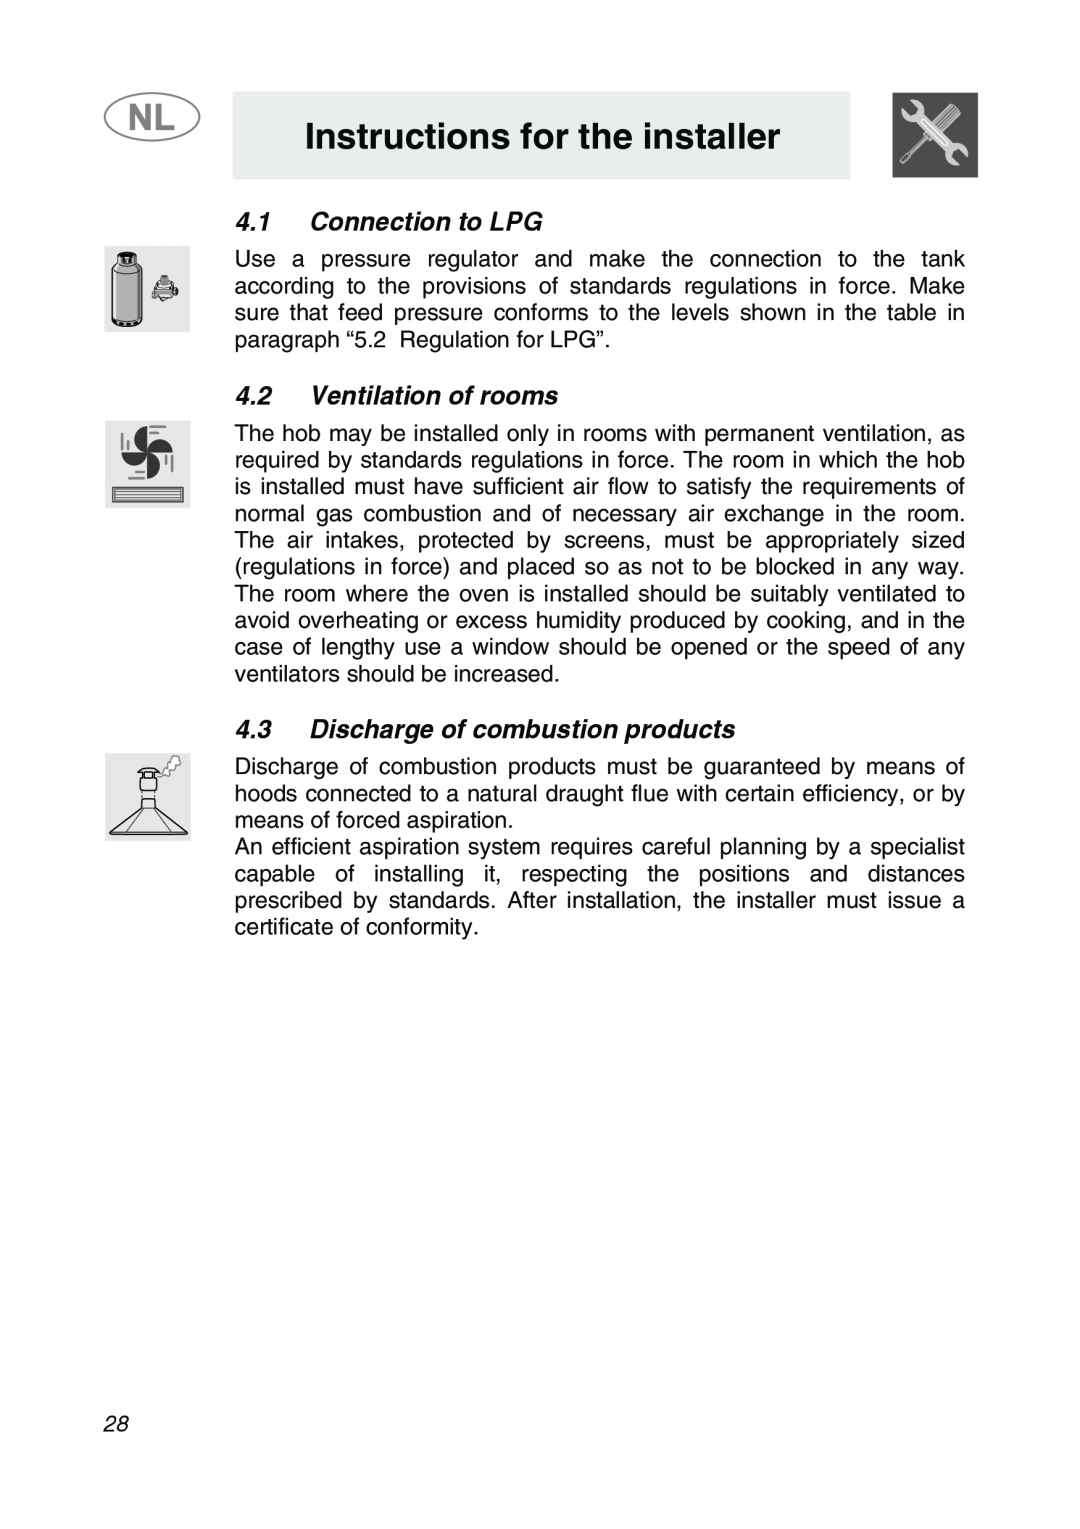 Smeg GKCO755, GKC755 manual 4.1Connection to LPG, 4.2Ventilation of rooms, 4.3Discharge of combustion products 